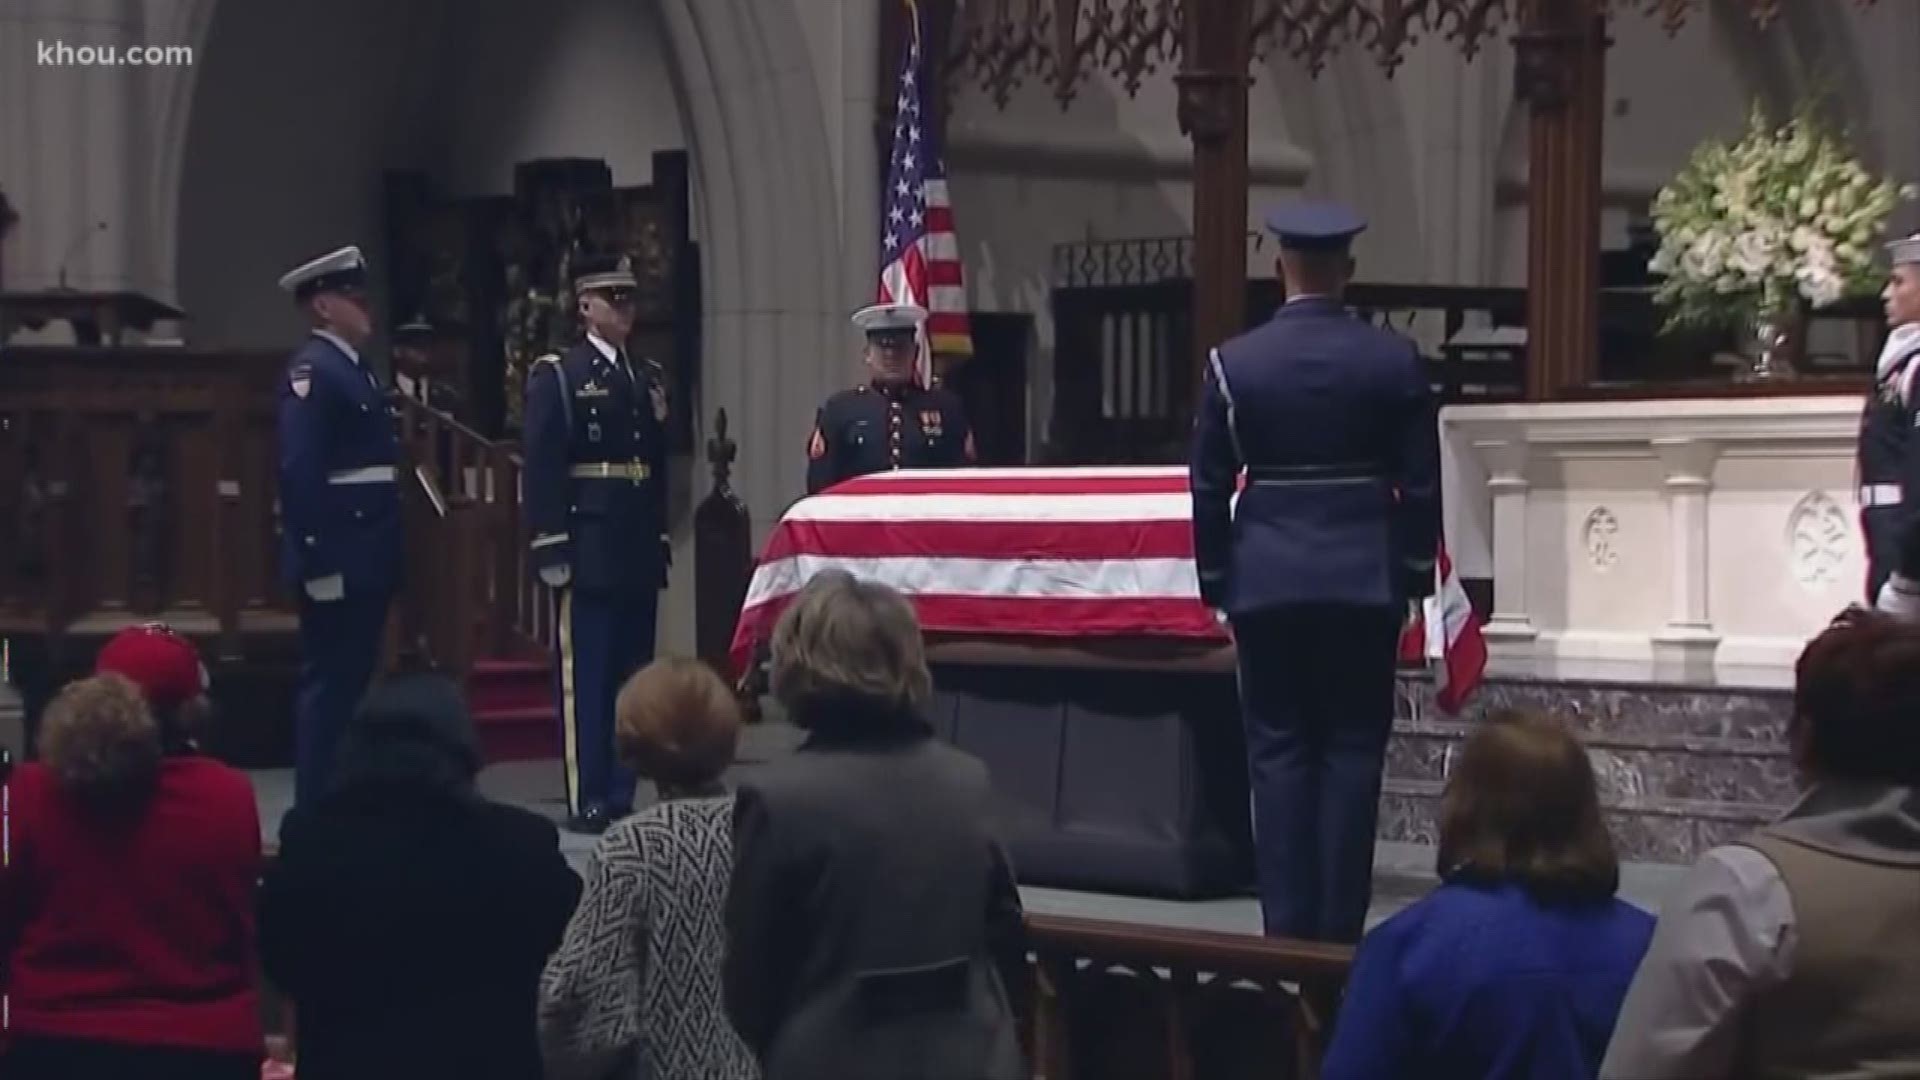 President George H.W. Bush arrived in Houston Wednesday where he lies in repose at St. Martin's Episcopal Church, plus more top stories on KHOU 11 News at 10.